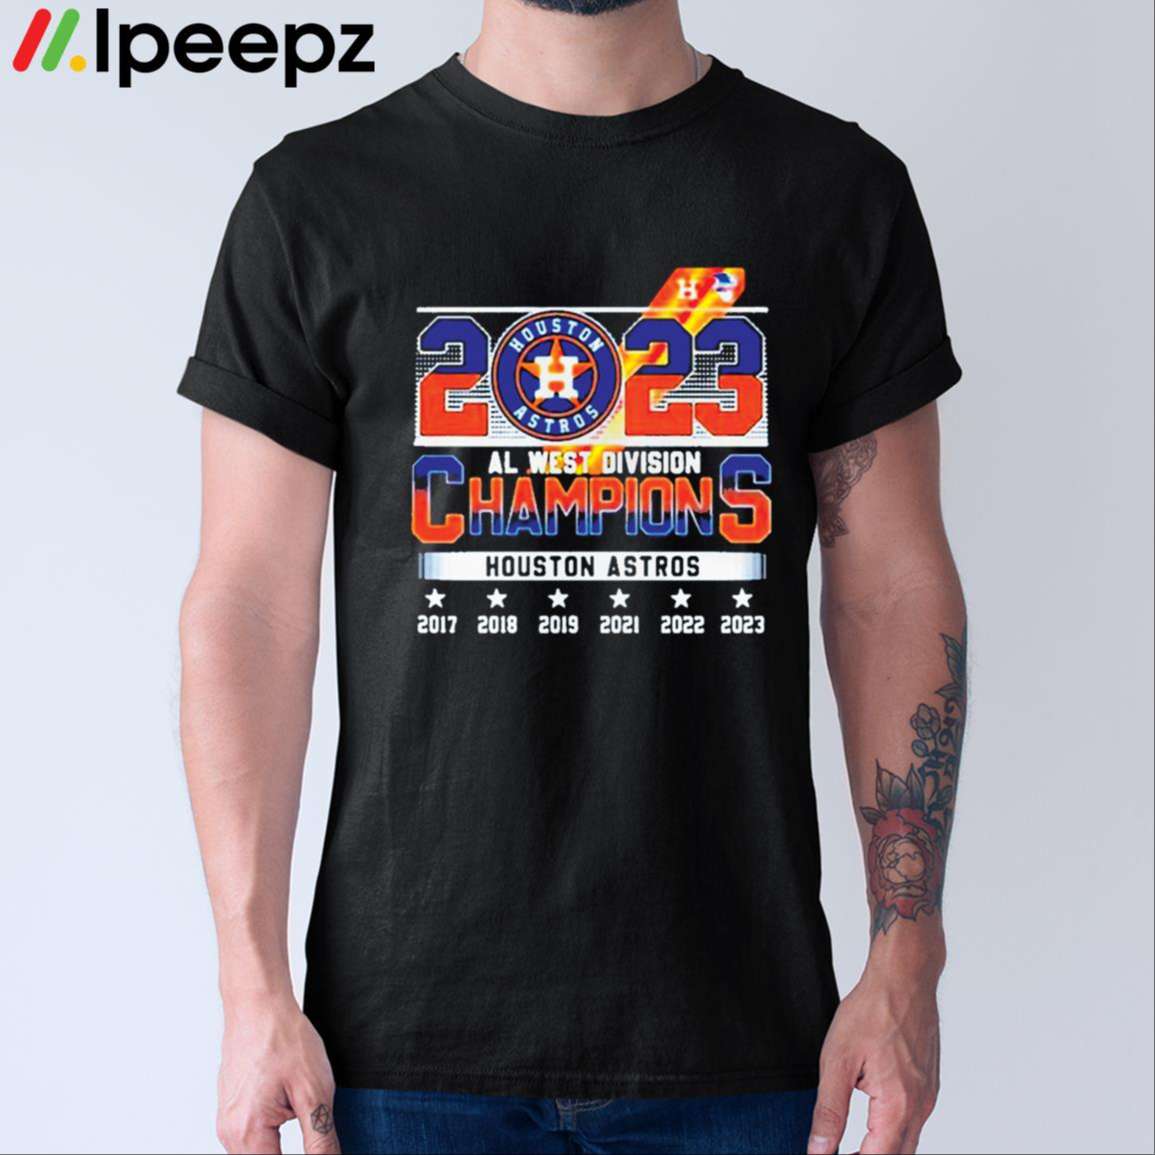 astros division champs shirts 2022